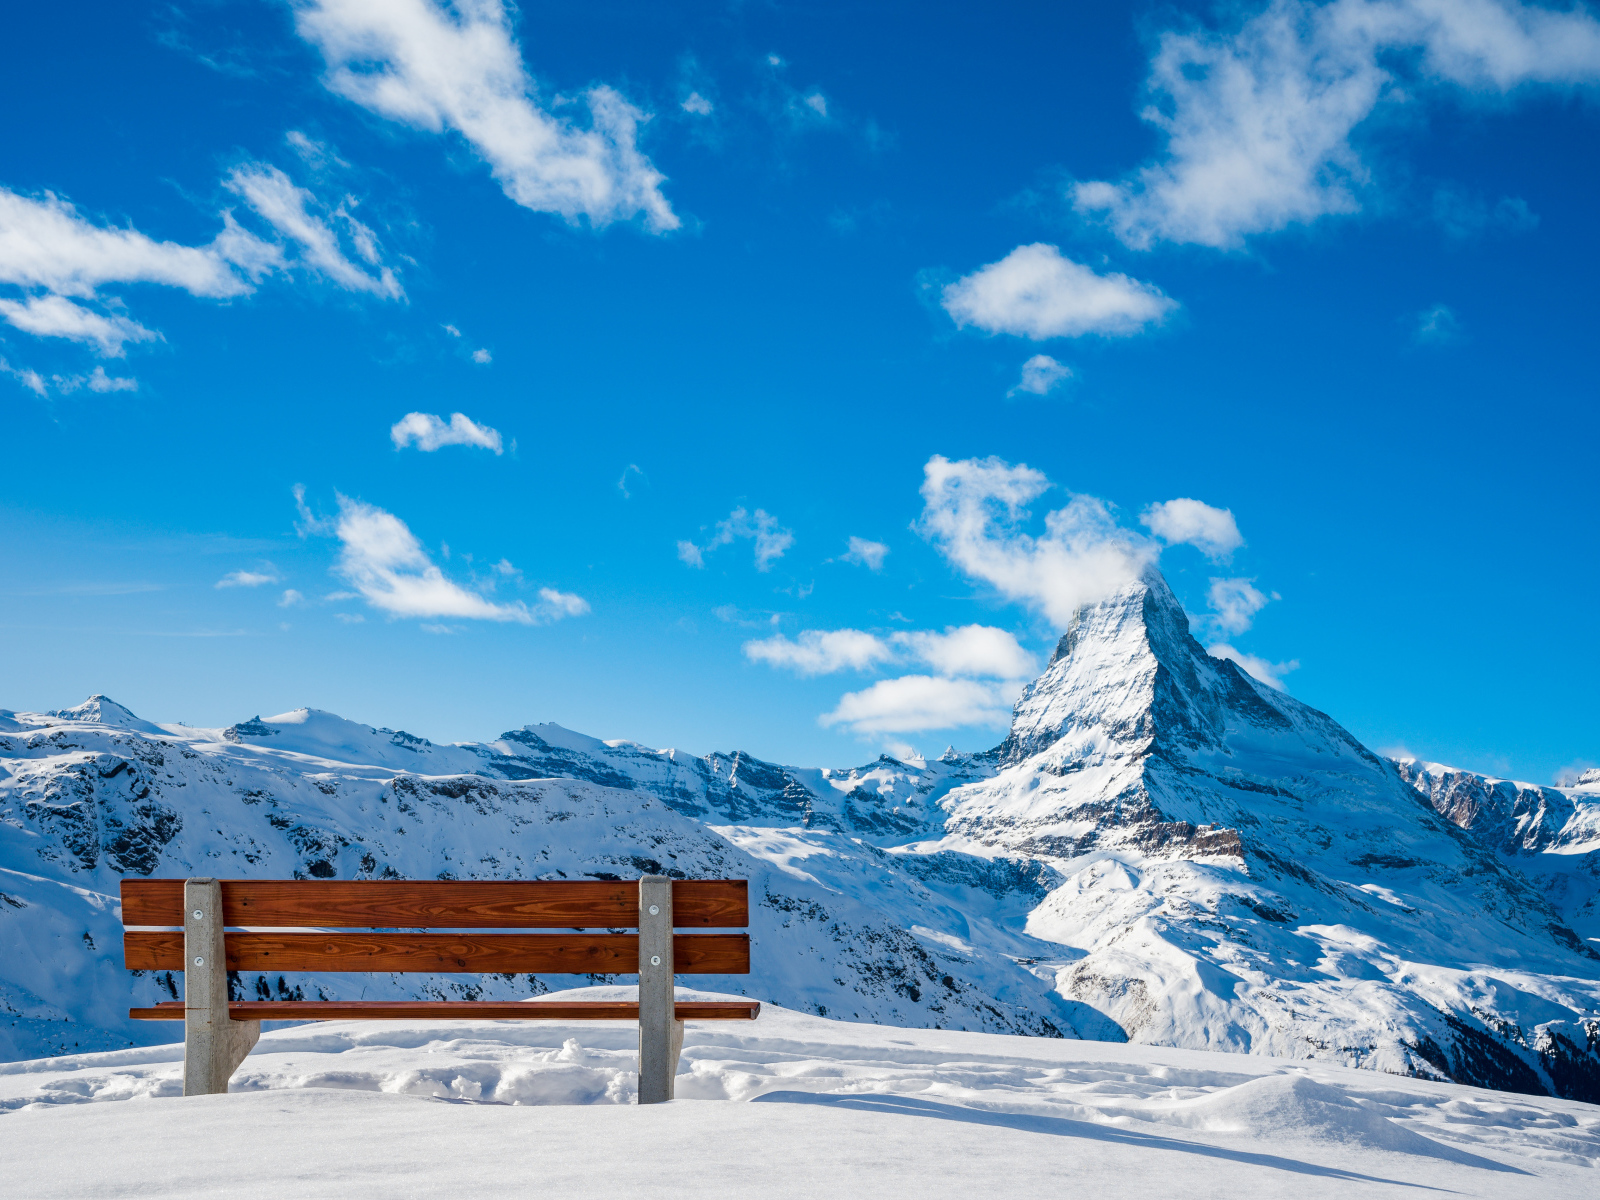 Bench in the snowy mountains under a blue clear sky